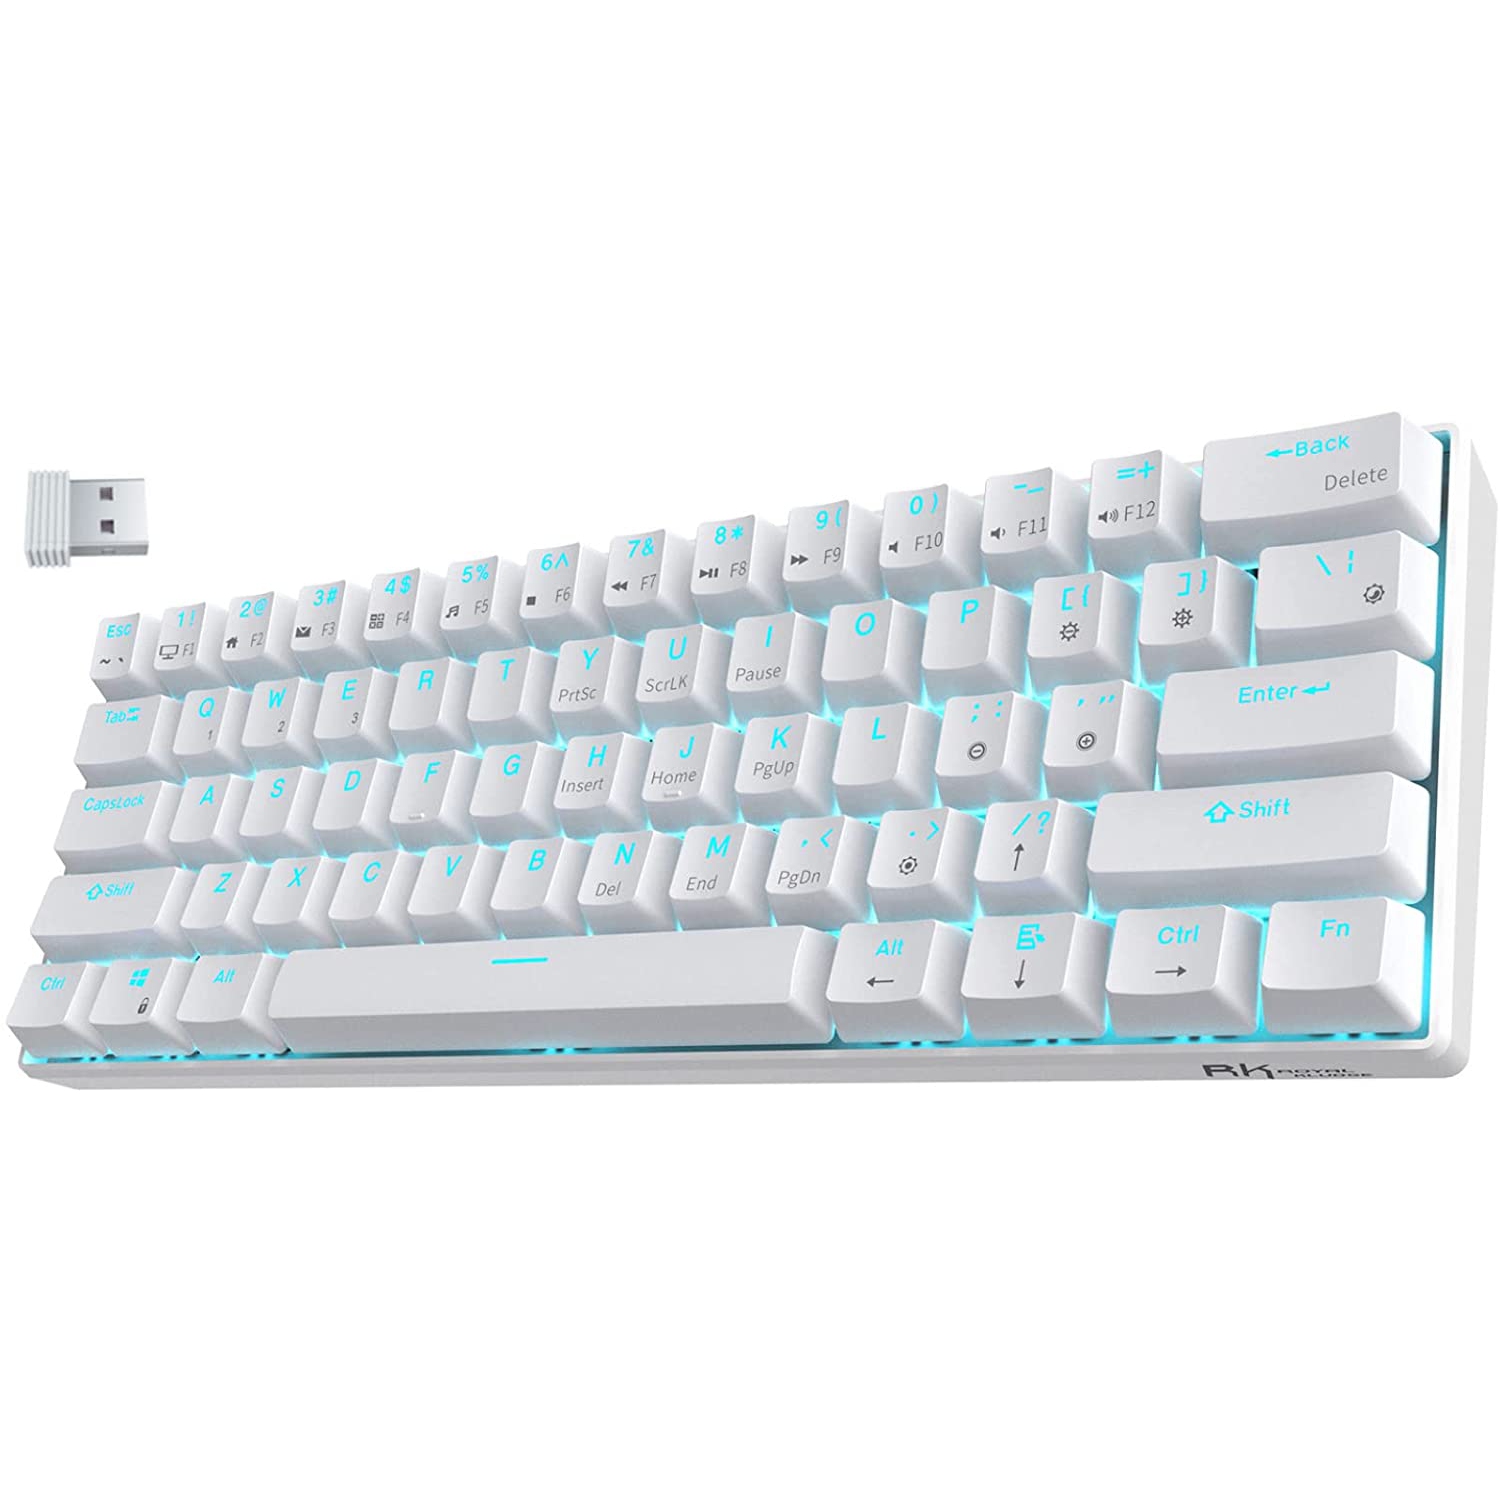 RK ROYAL KLUDGE RK61 Wireless 60% Mechanical Gaming Keyboard, Ultra-Compact Bluetooth Keyboard with Linear and Quiet Red Switch, Compatible for Multi-Device Connection, White